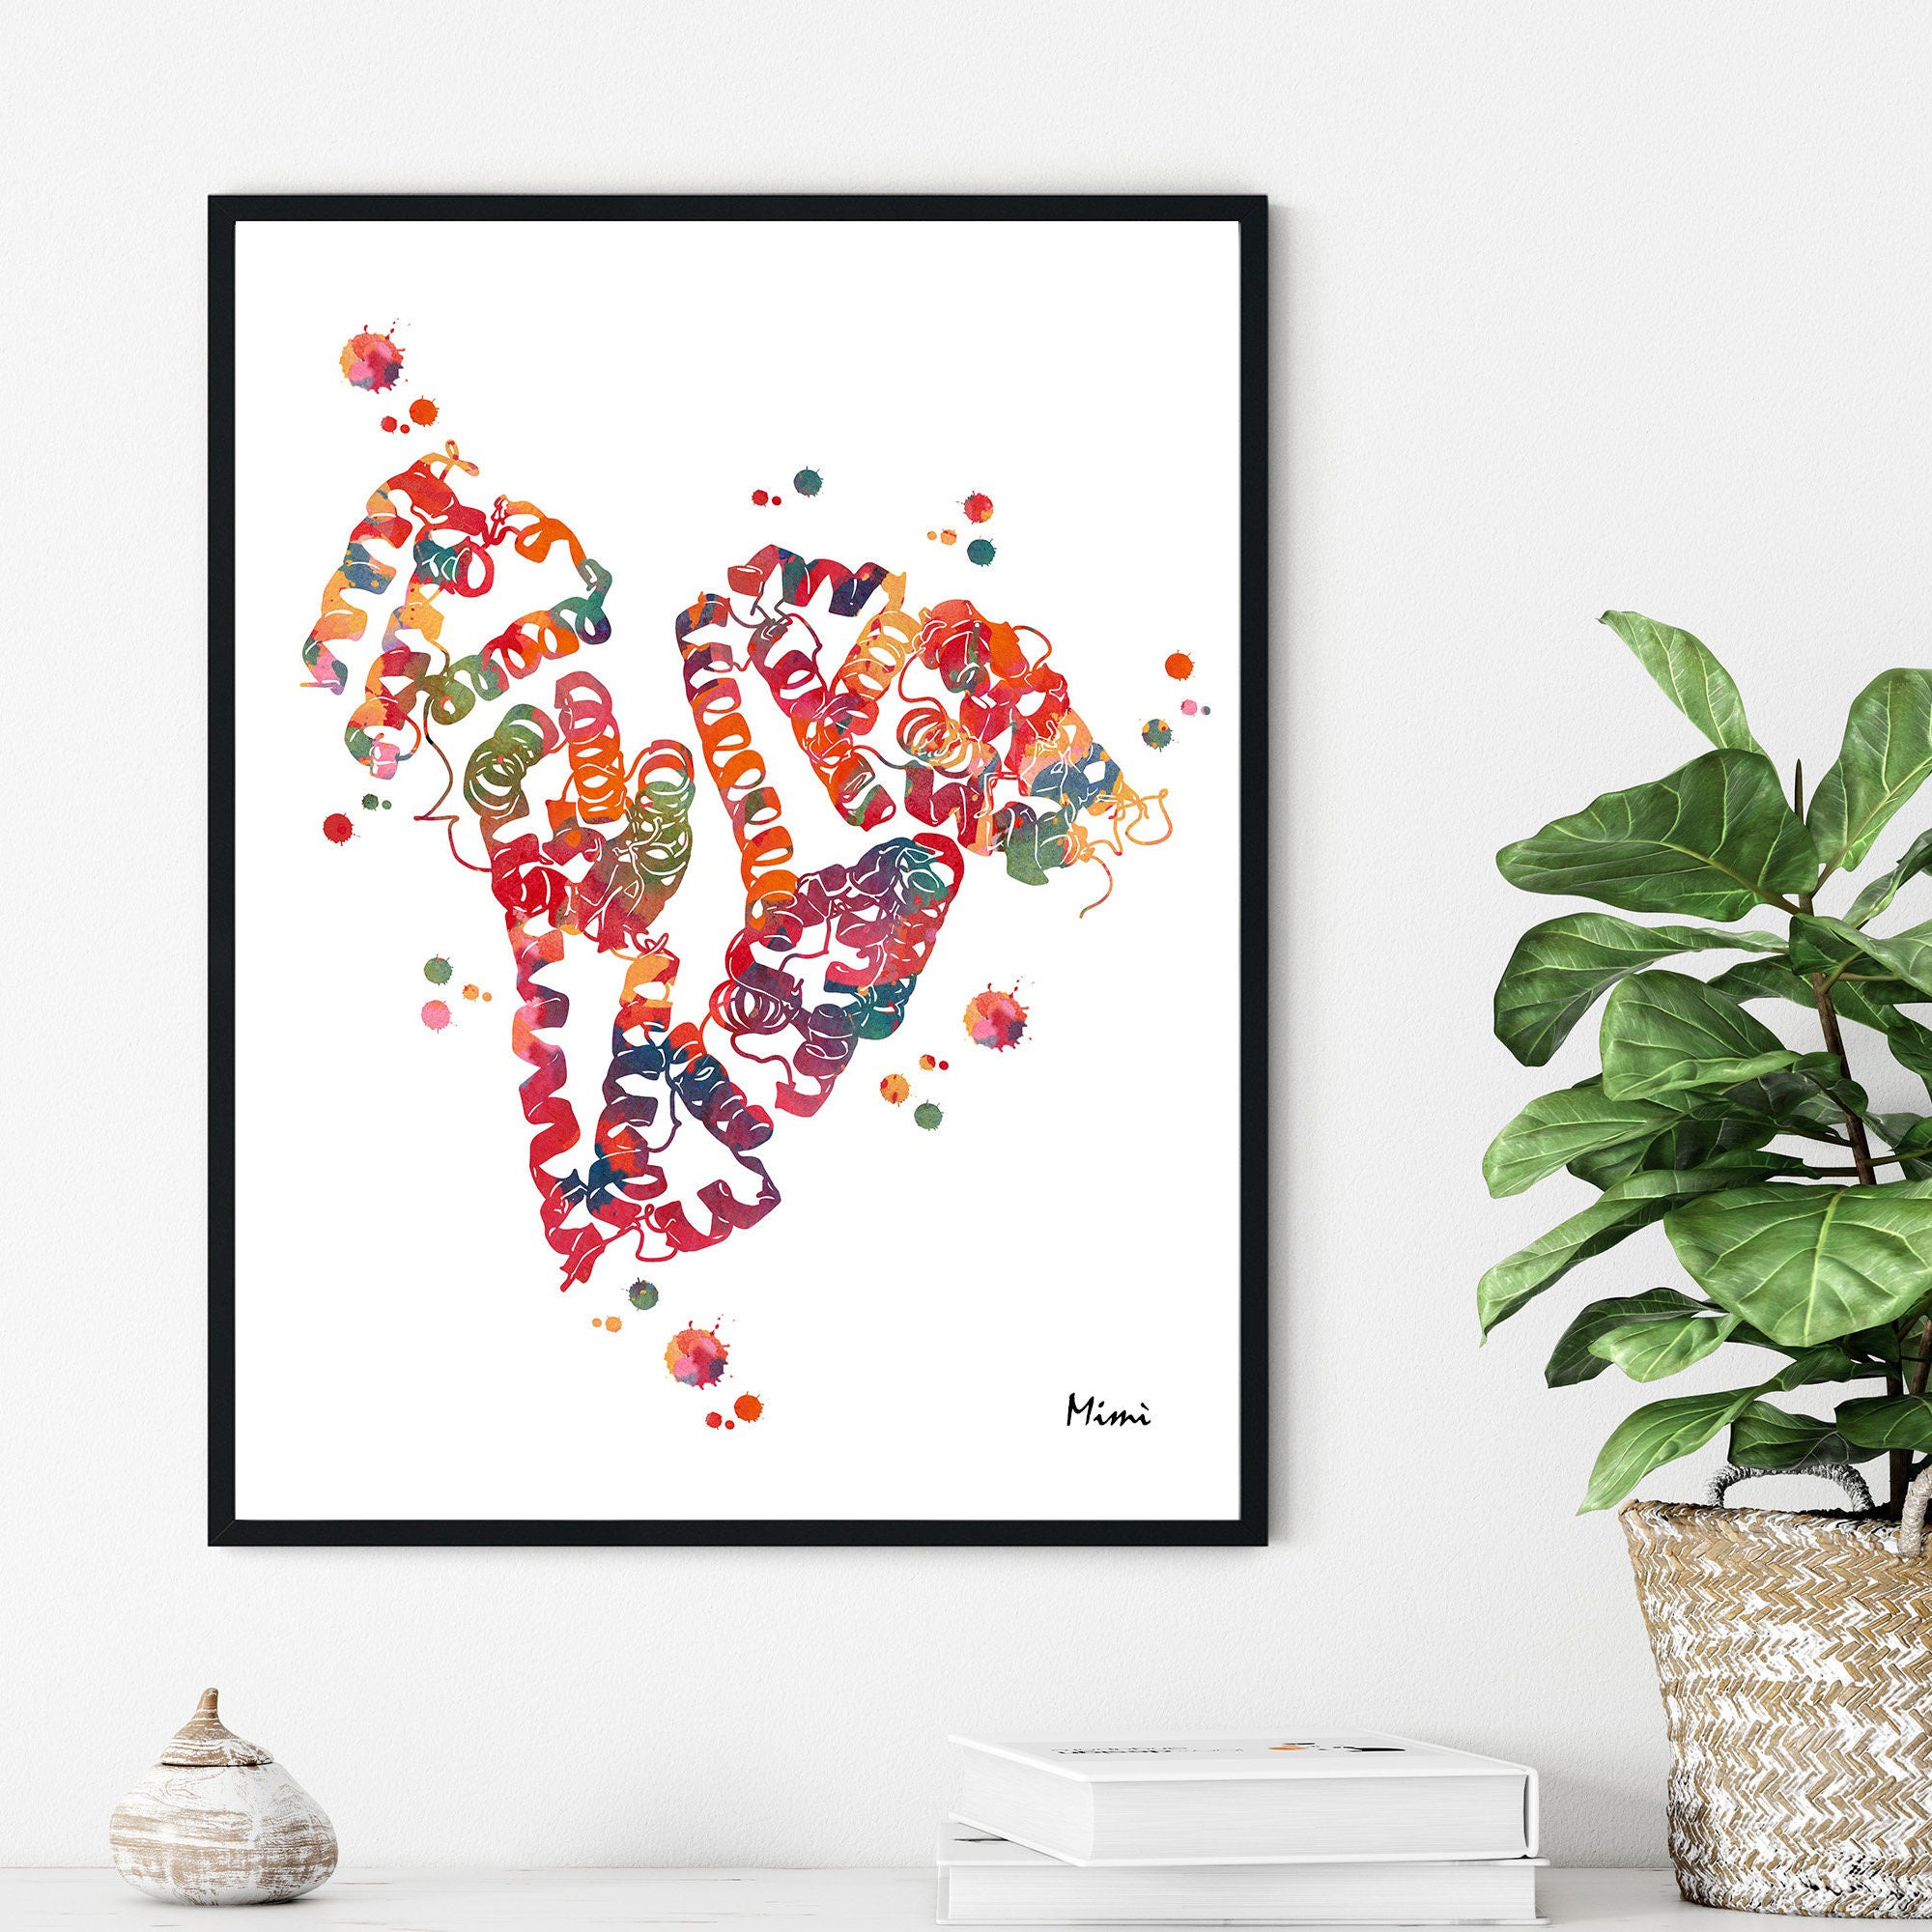 Second Image of Albumin Protein Molecular Structure Watercolor Print